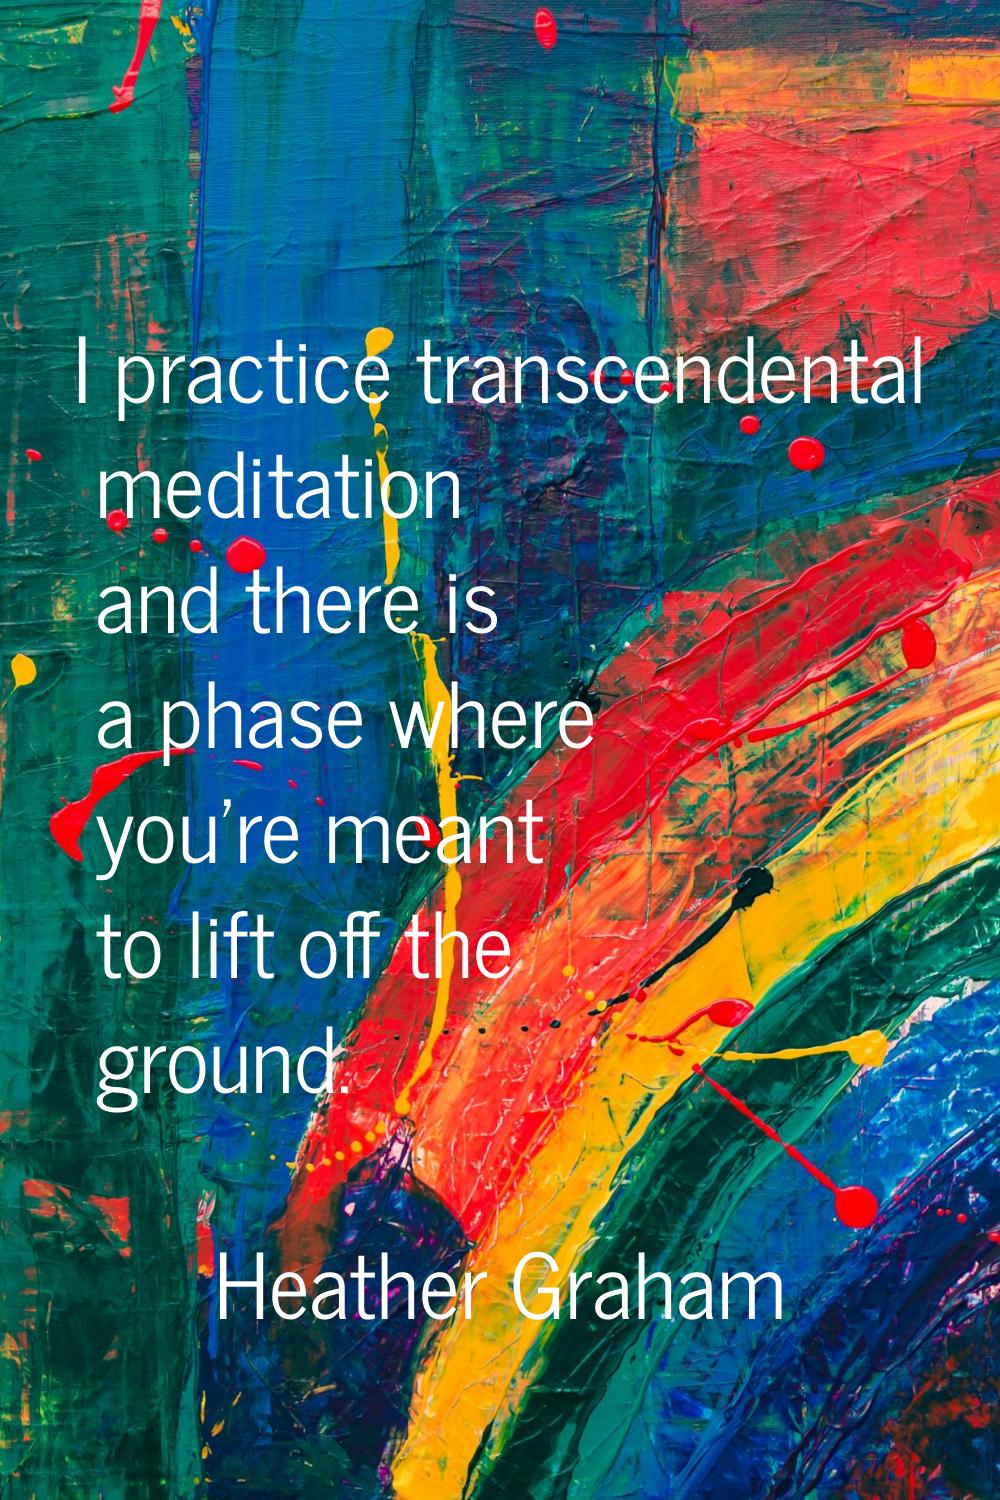 I practice transcendental meditation and there is a phase where you're meant to lift off the ground